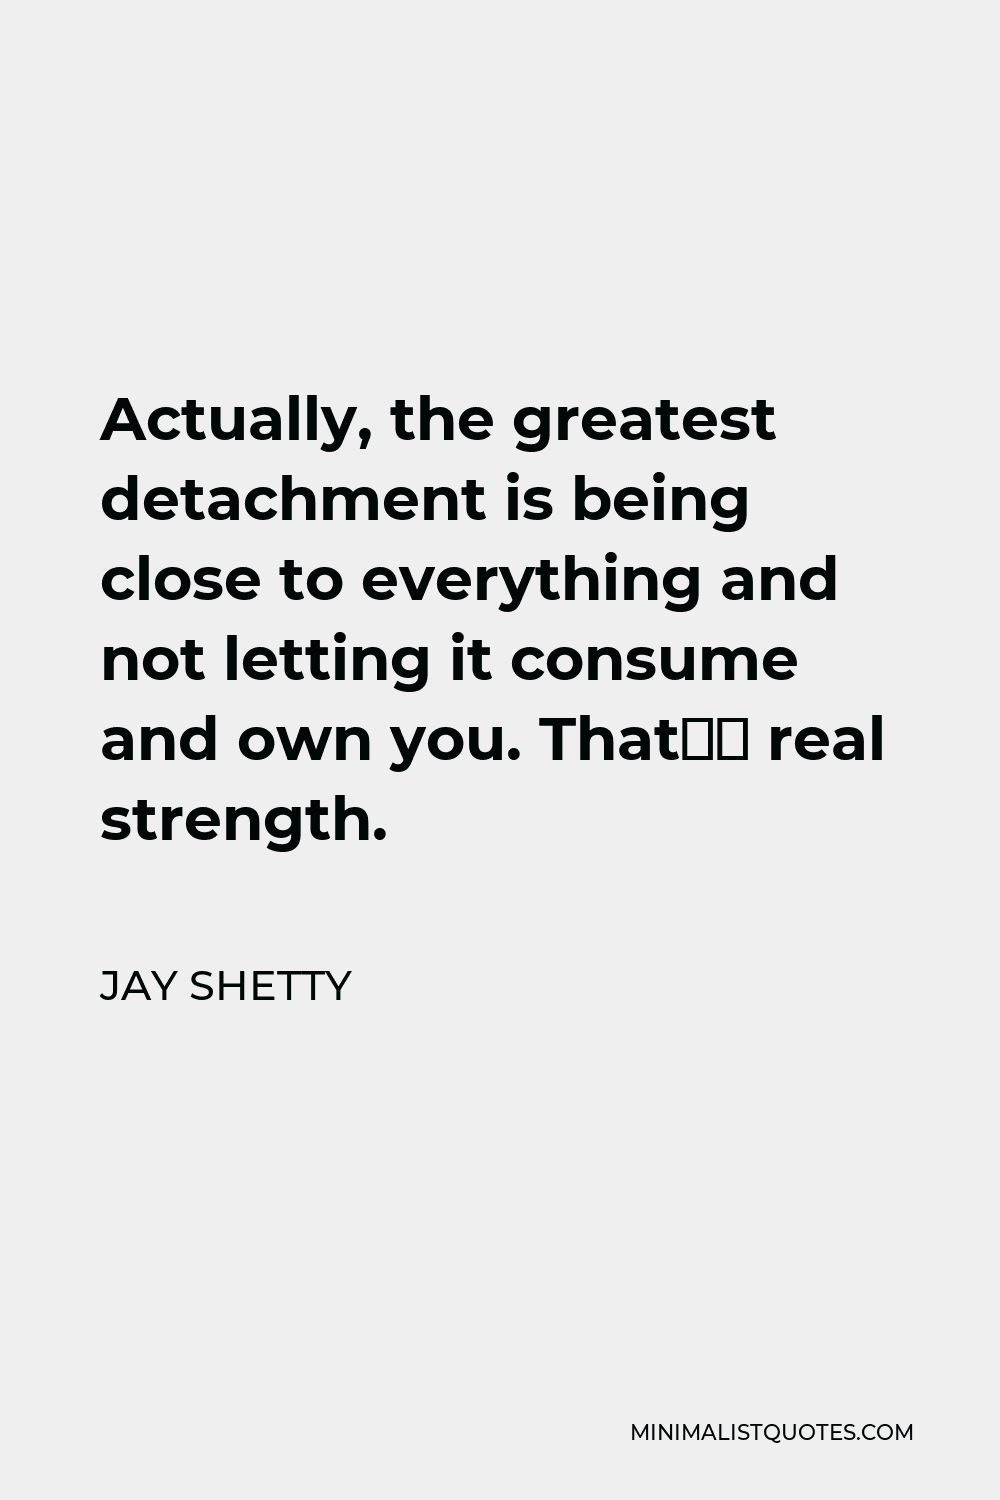 Jay Shetty Quote - Actually, the greatest detachment is being close to everything and not letting it consume and own you. That’s real strength.